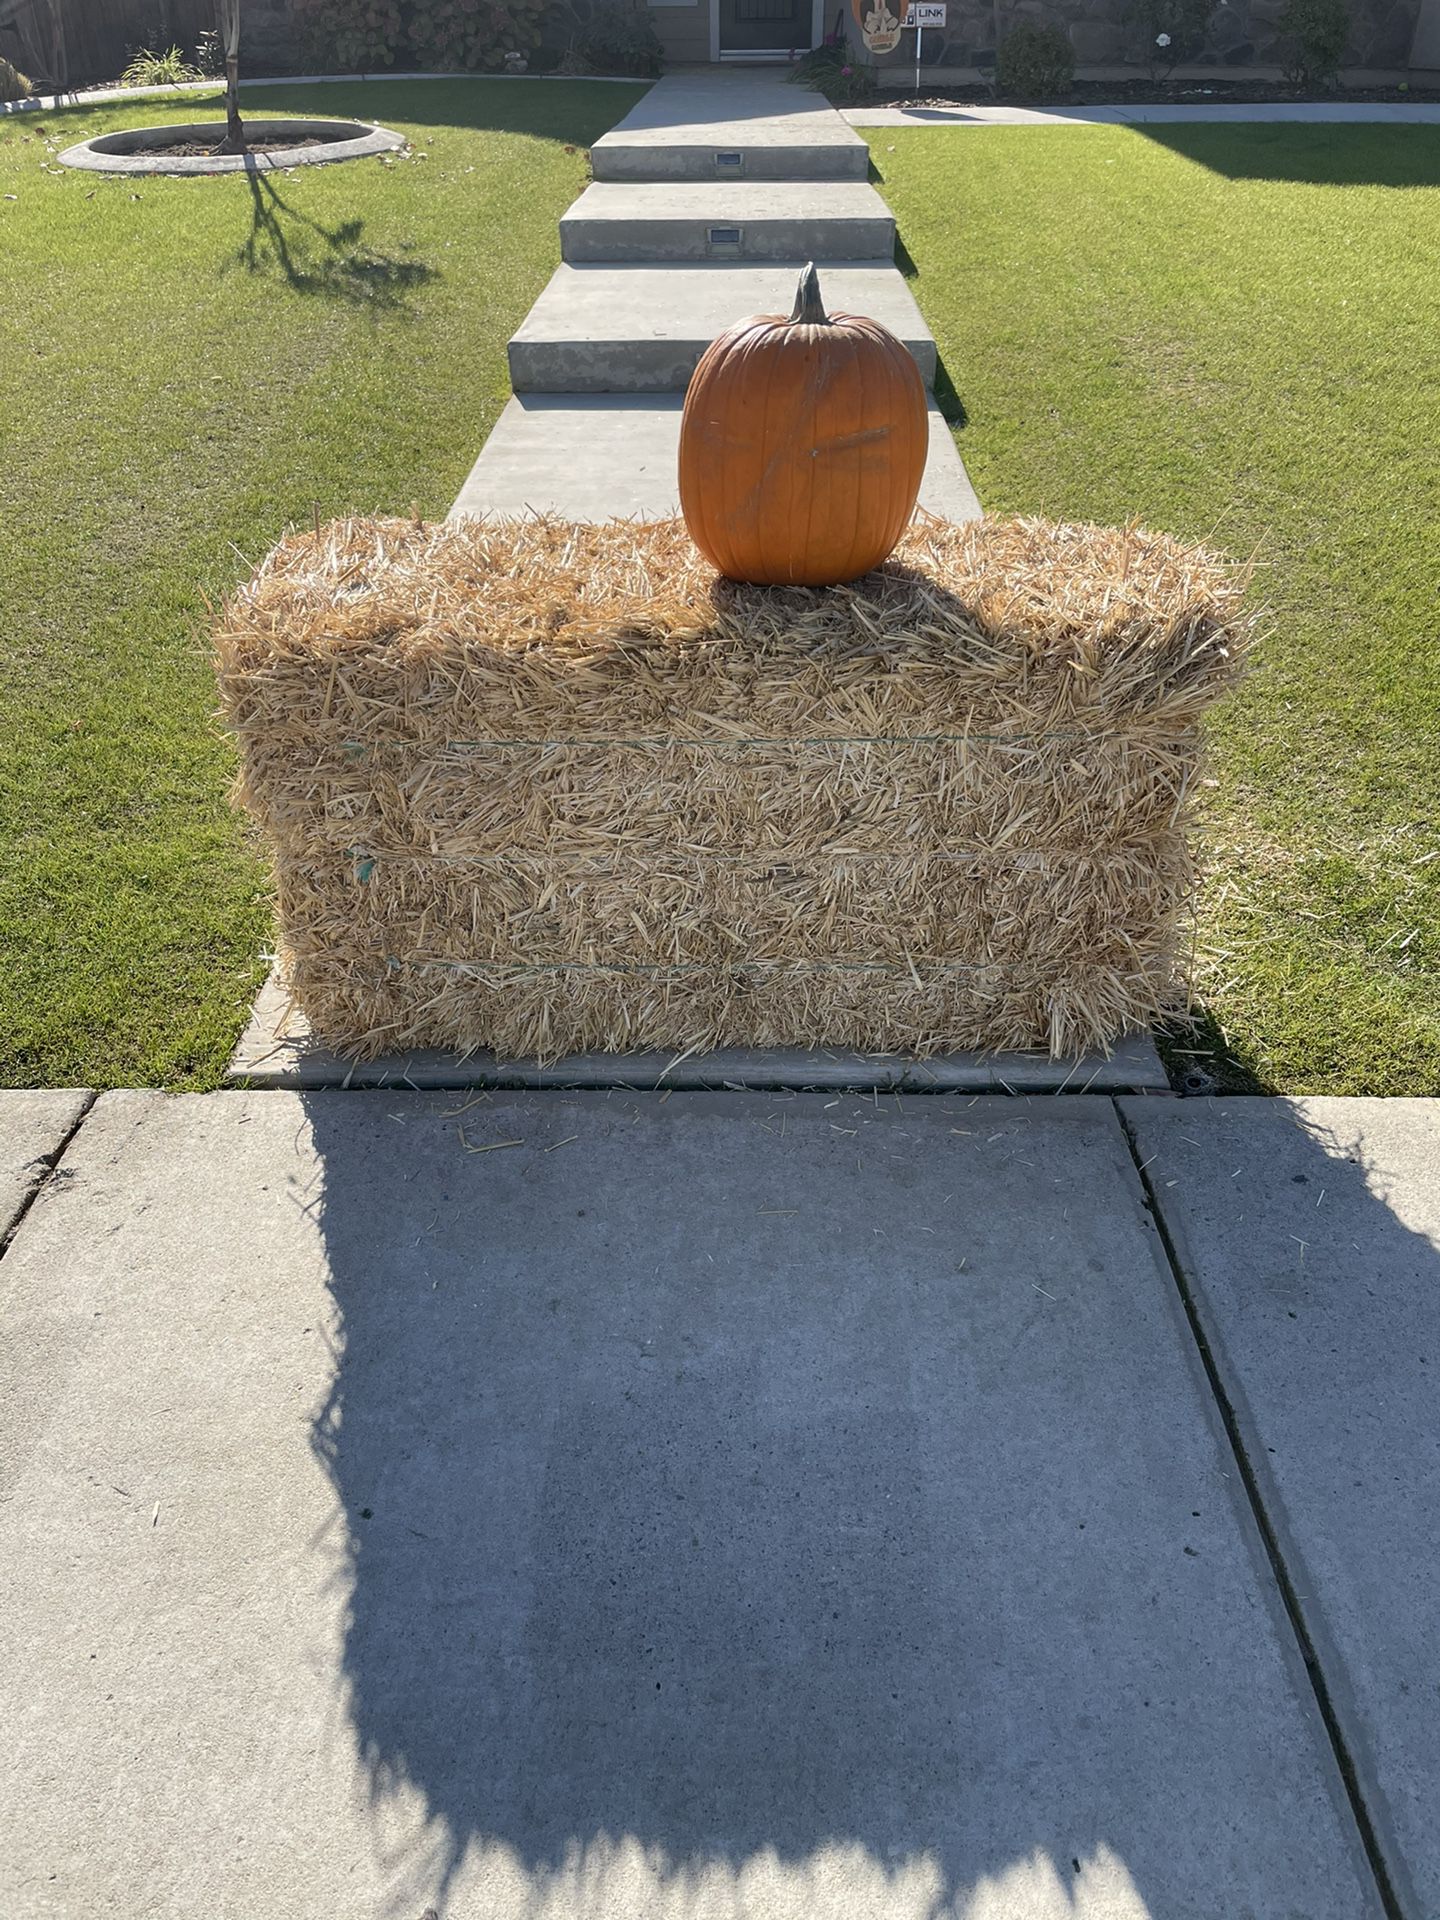 Free Bail of Hay and Pumpkin